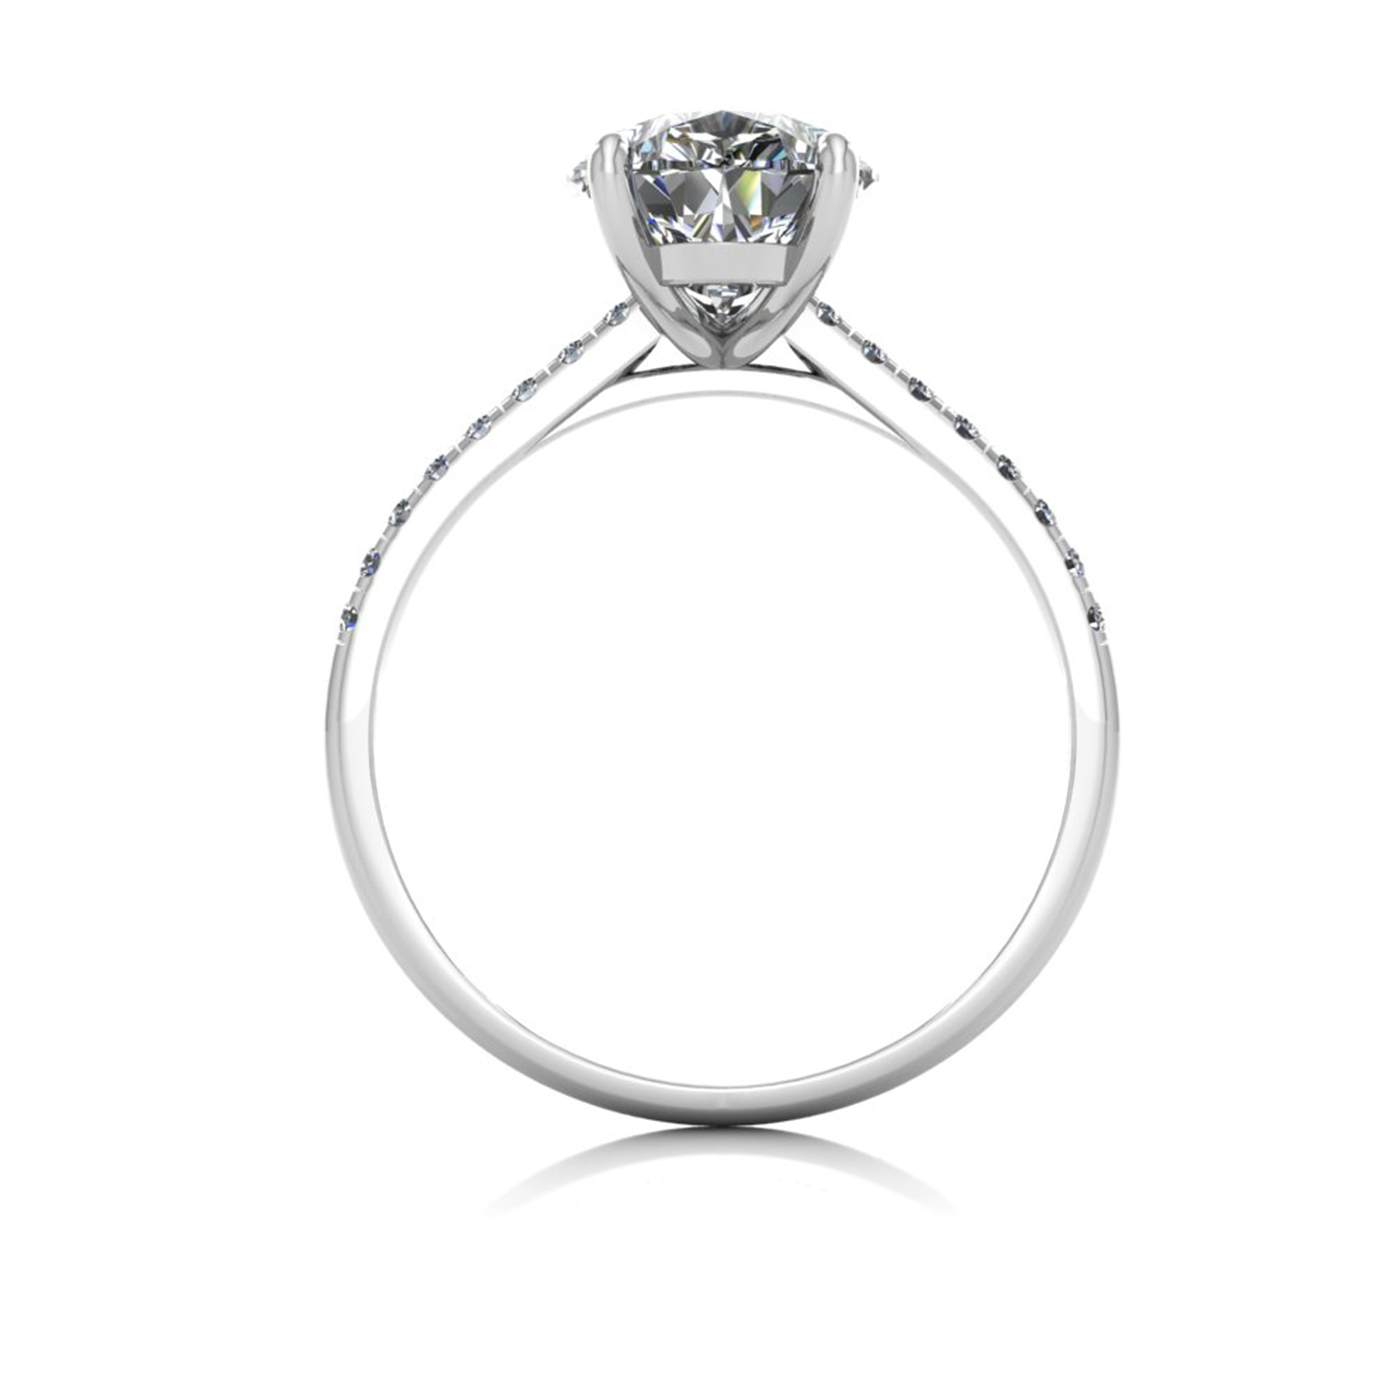 18k white gold 2,50 ct 3 prongs pear diamond engagement ring with whisper thin pavÉ set band